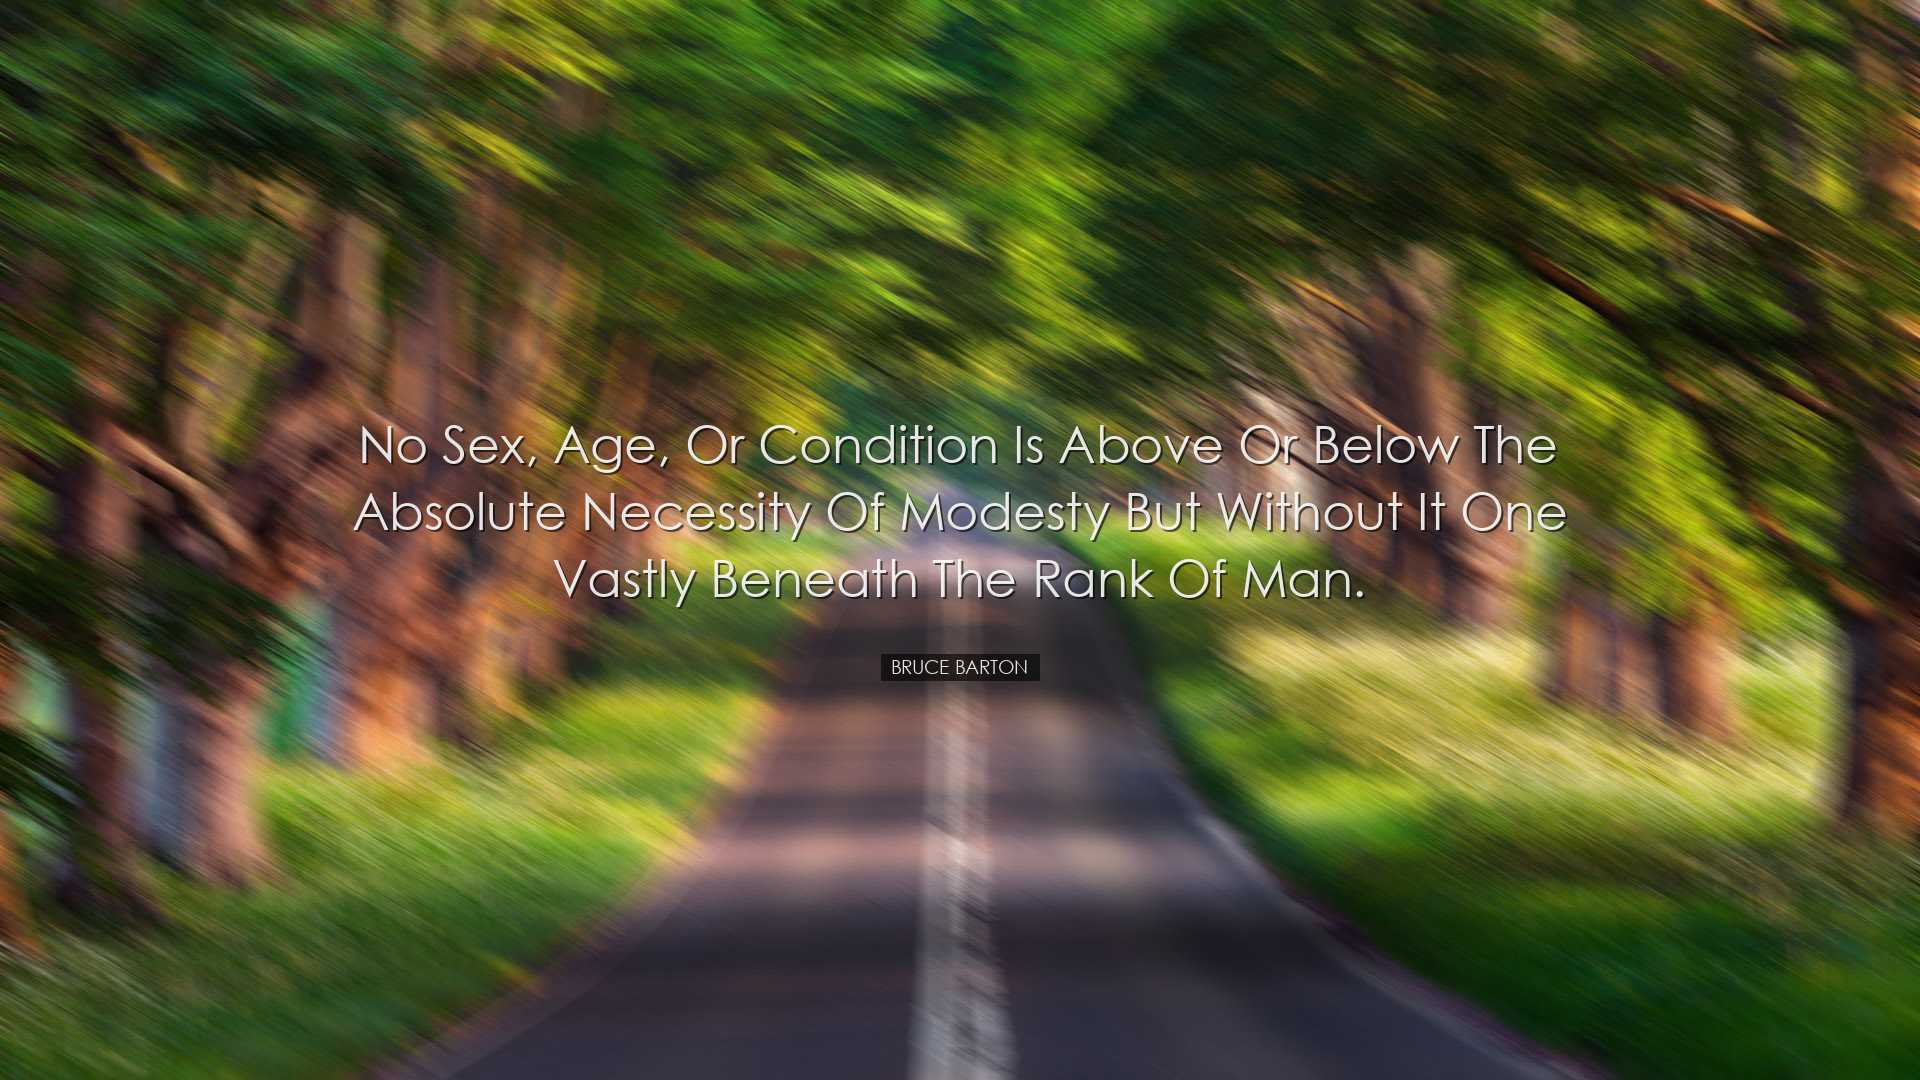 No sex, age, or condition is above or below the absolute necessity